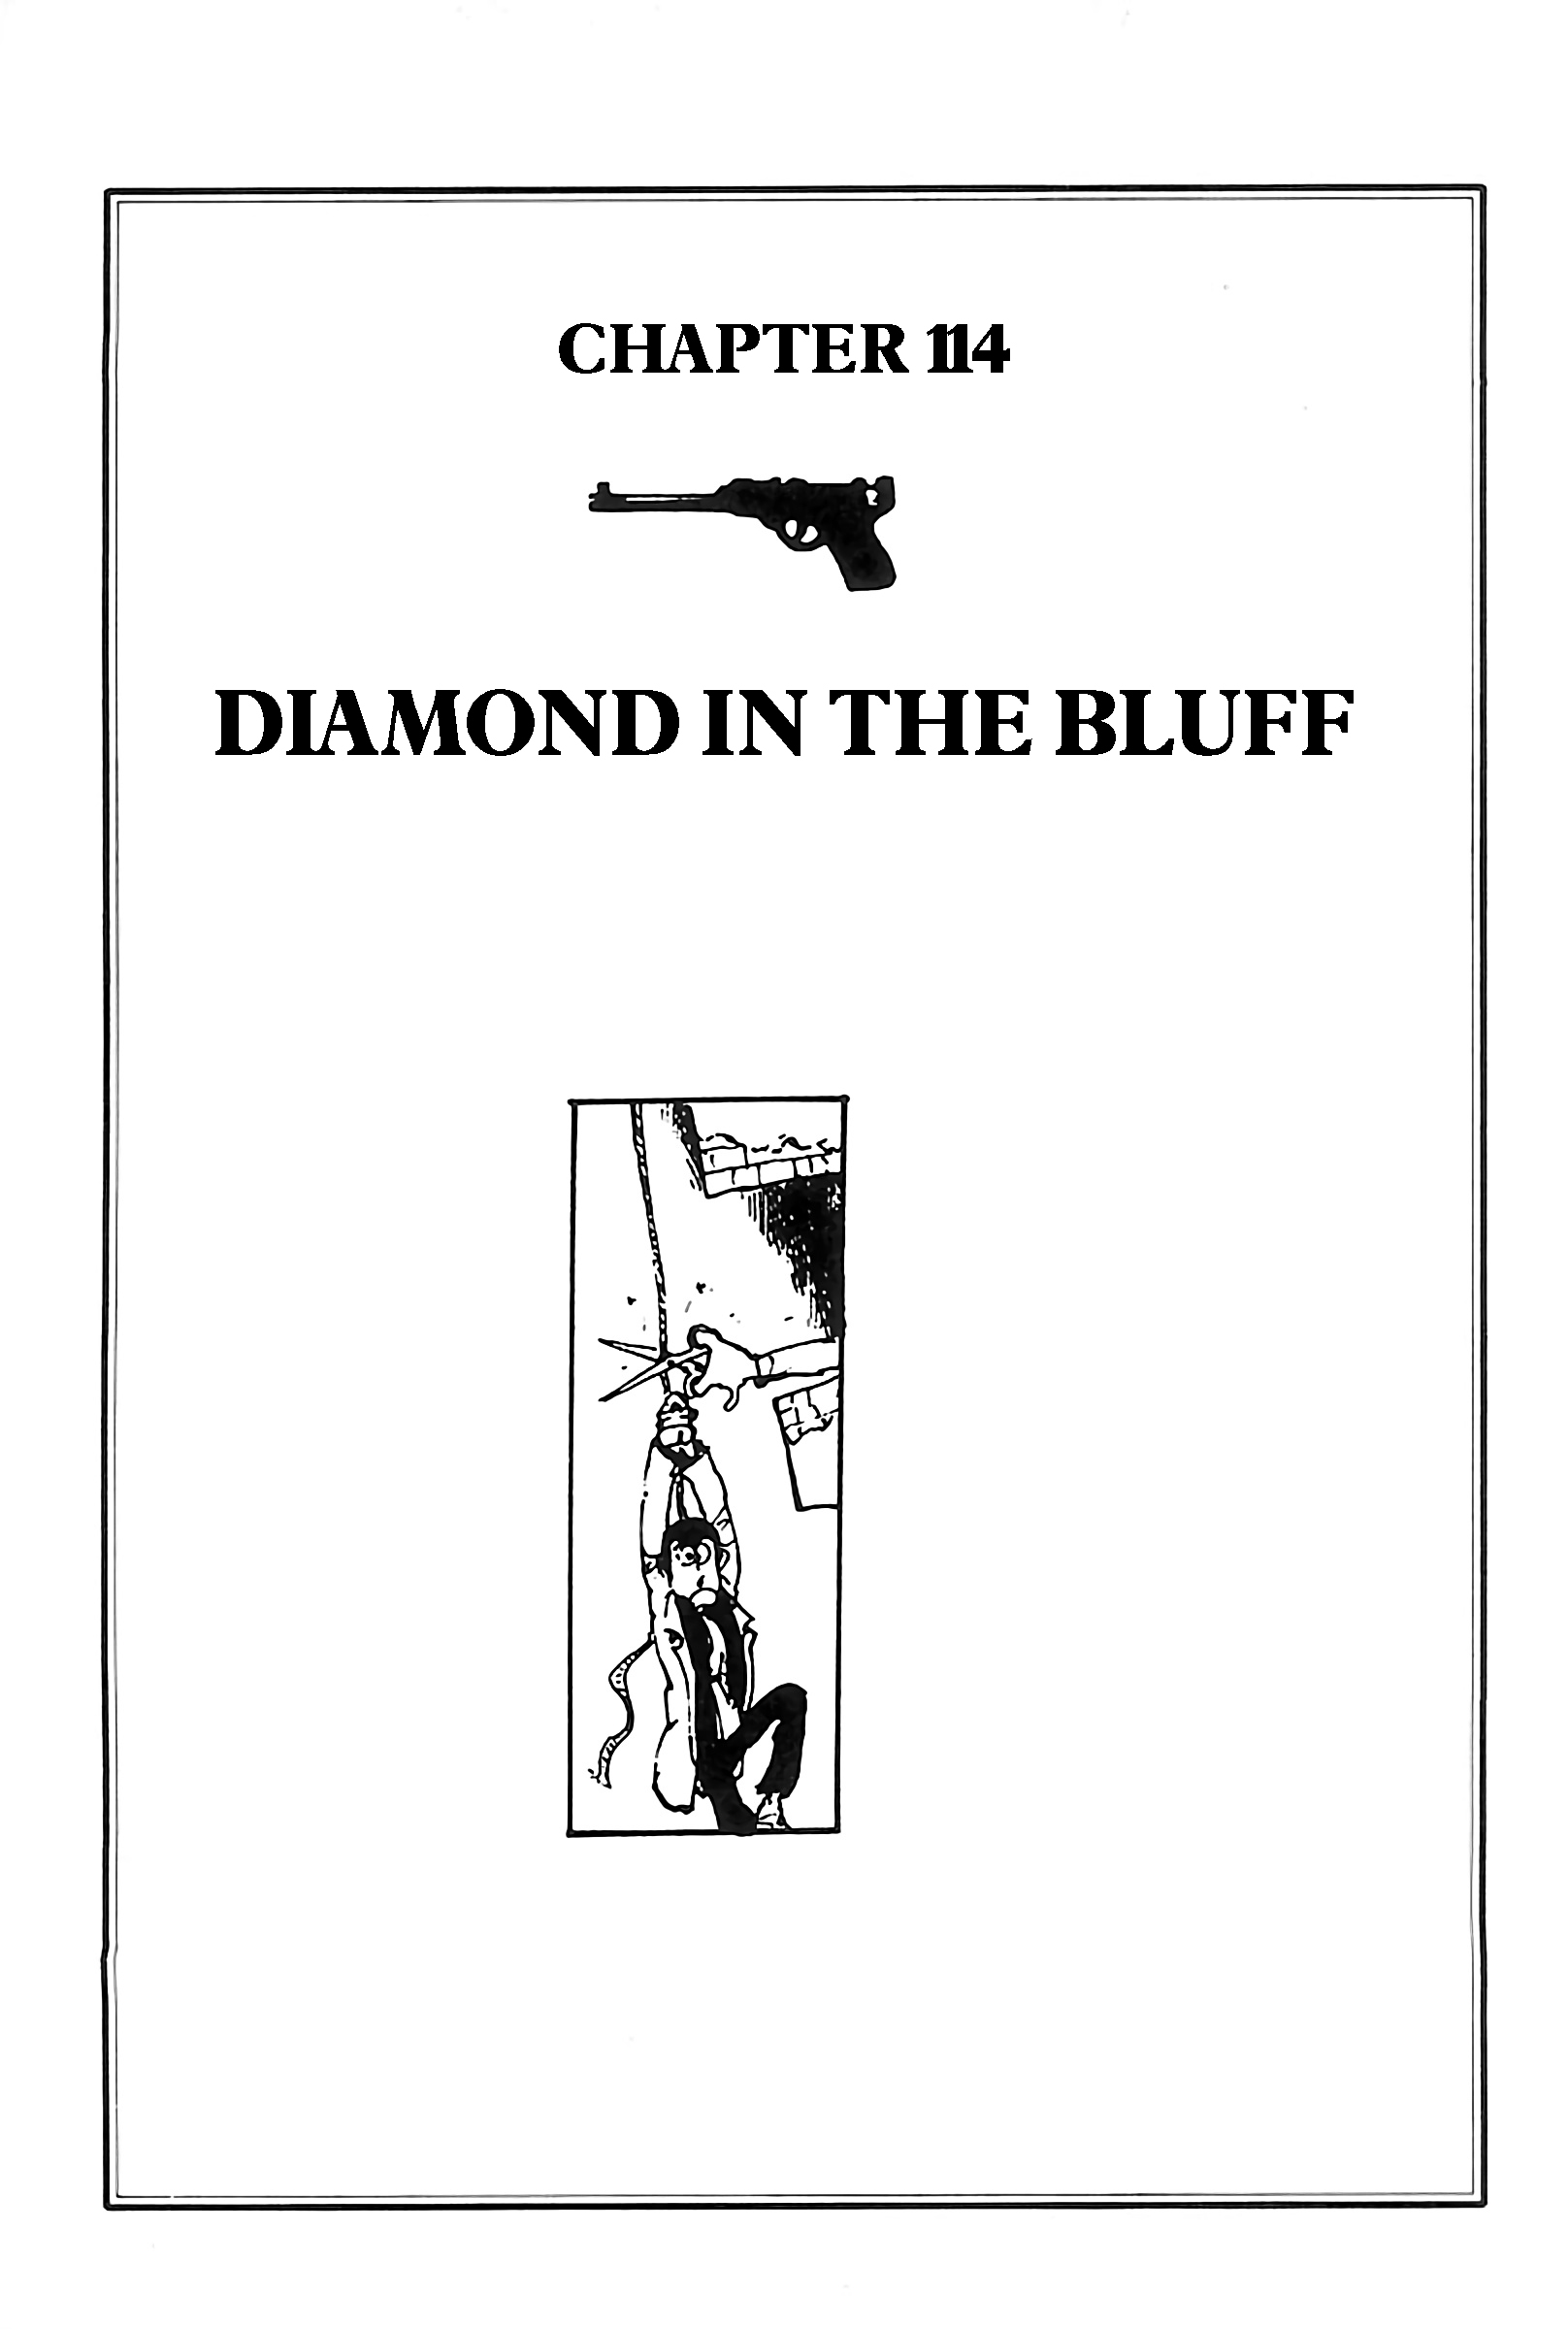 Lupin Iii: World’S Most Wanted Vol.10 Chapter 114: Diamond In The Bluff - Picture 1